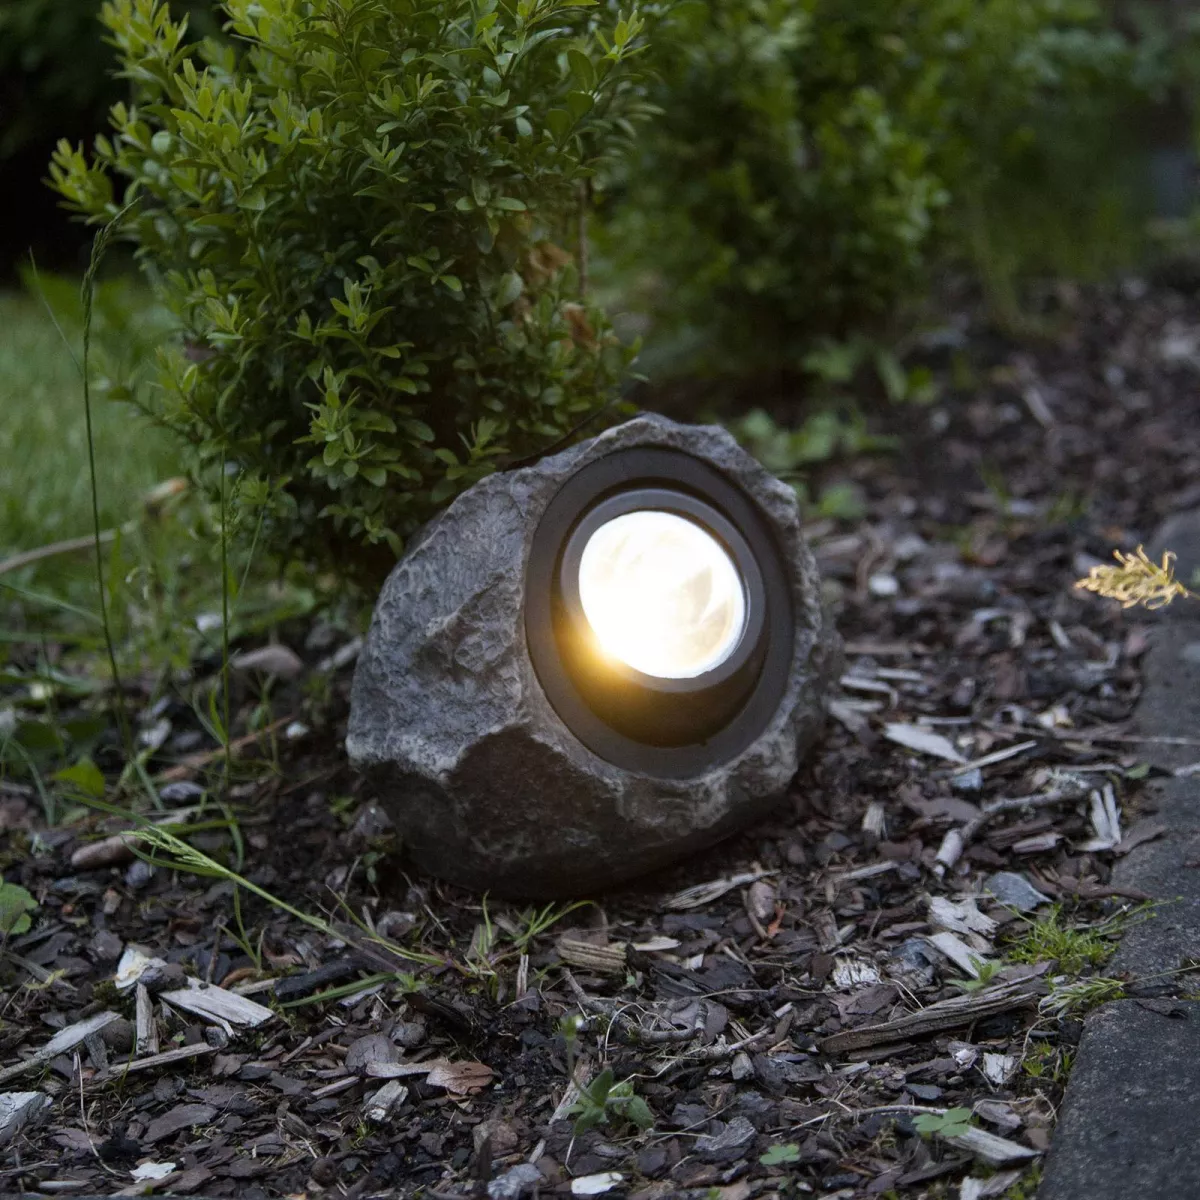 #1 - Rocky LED-solcellelampe, justerbar